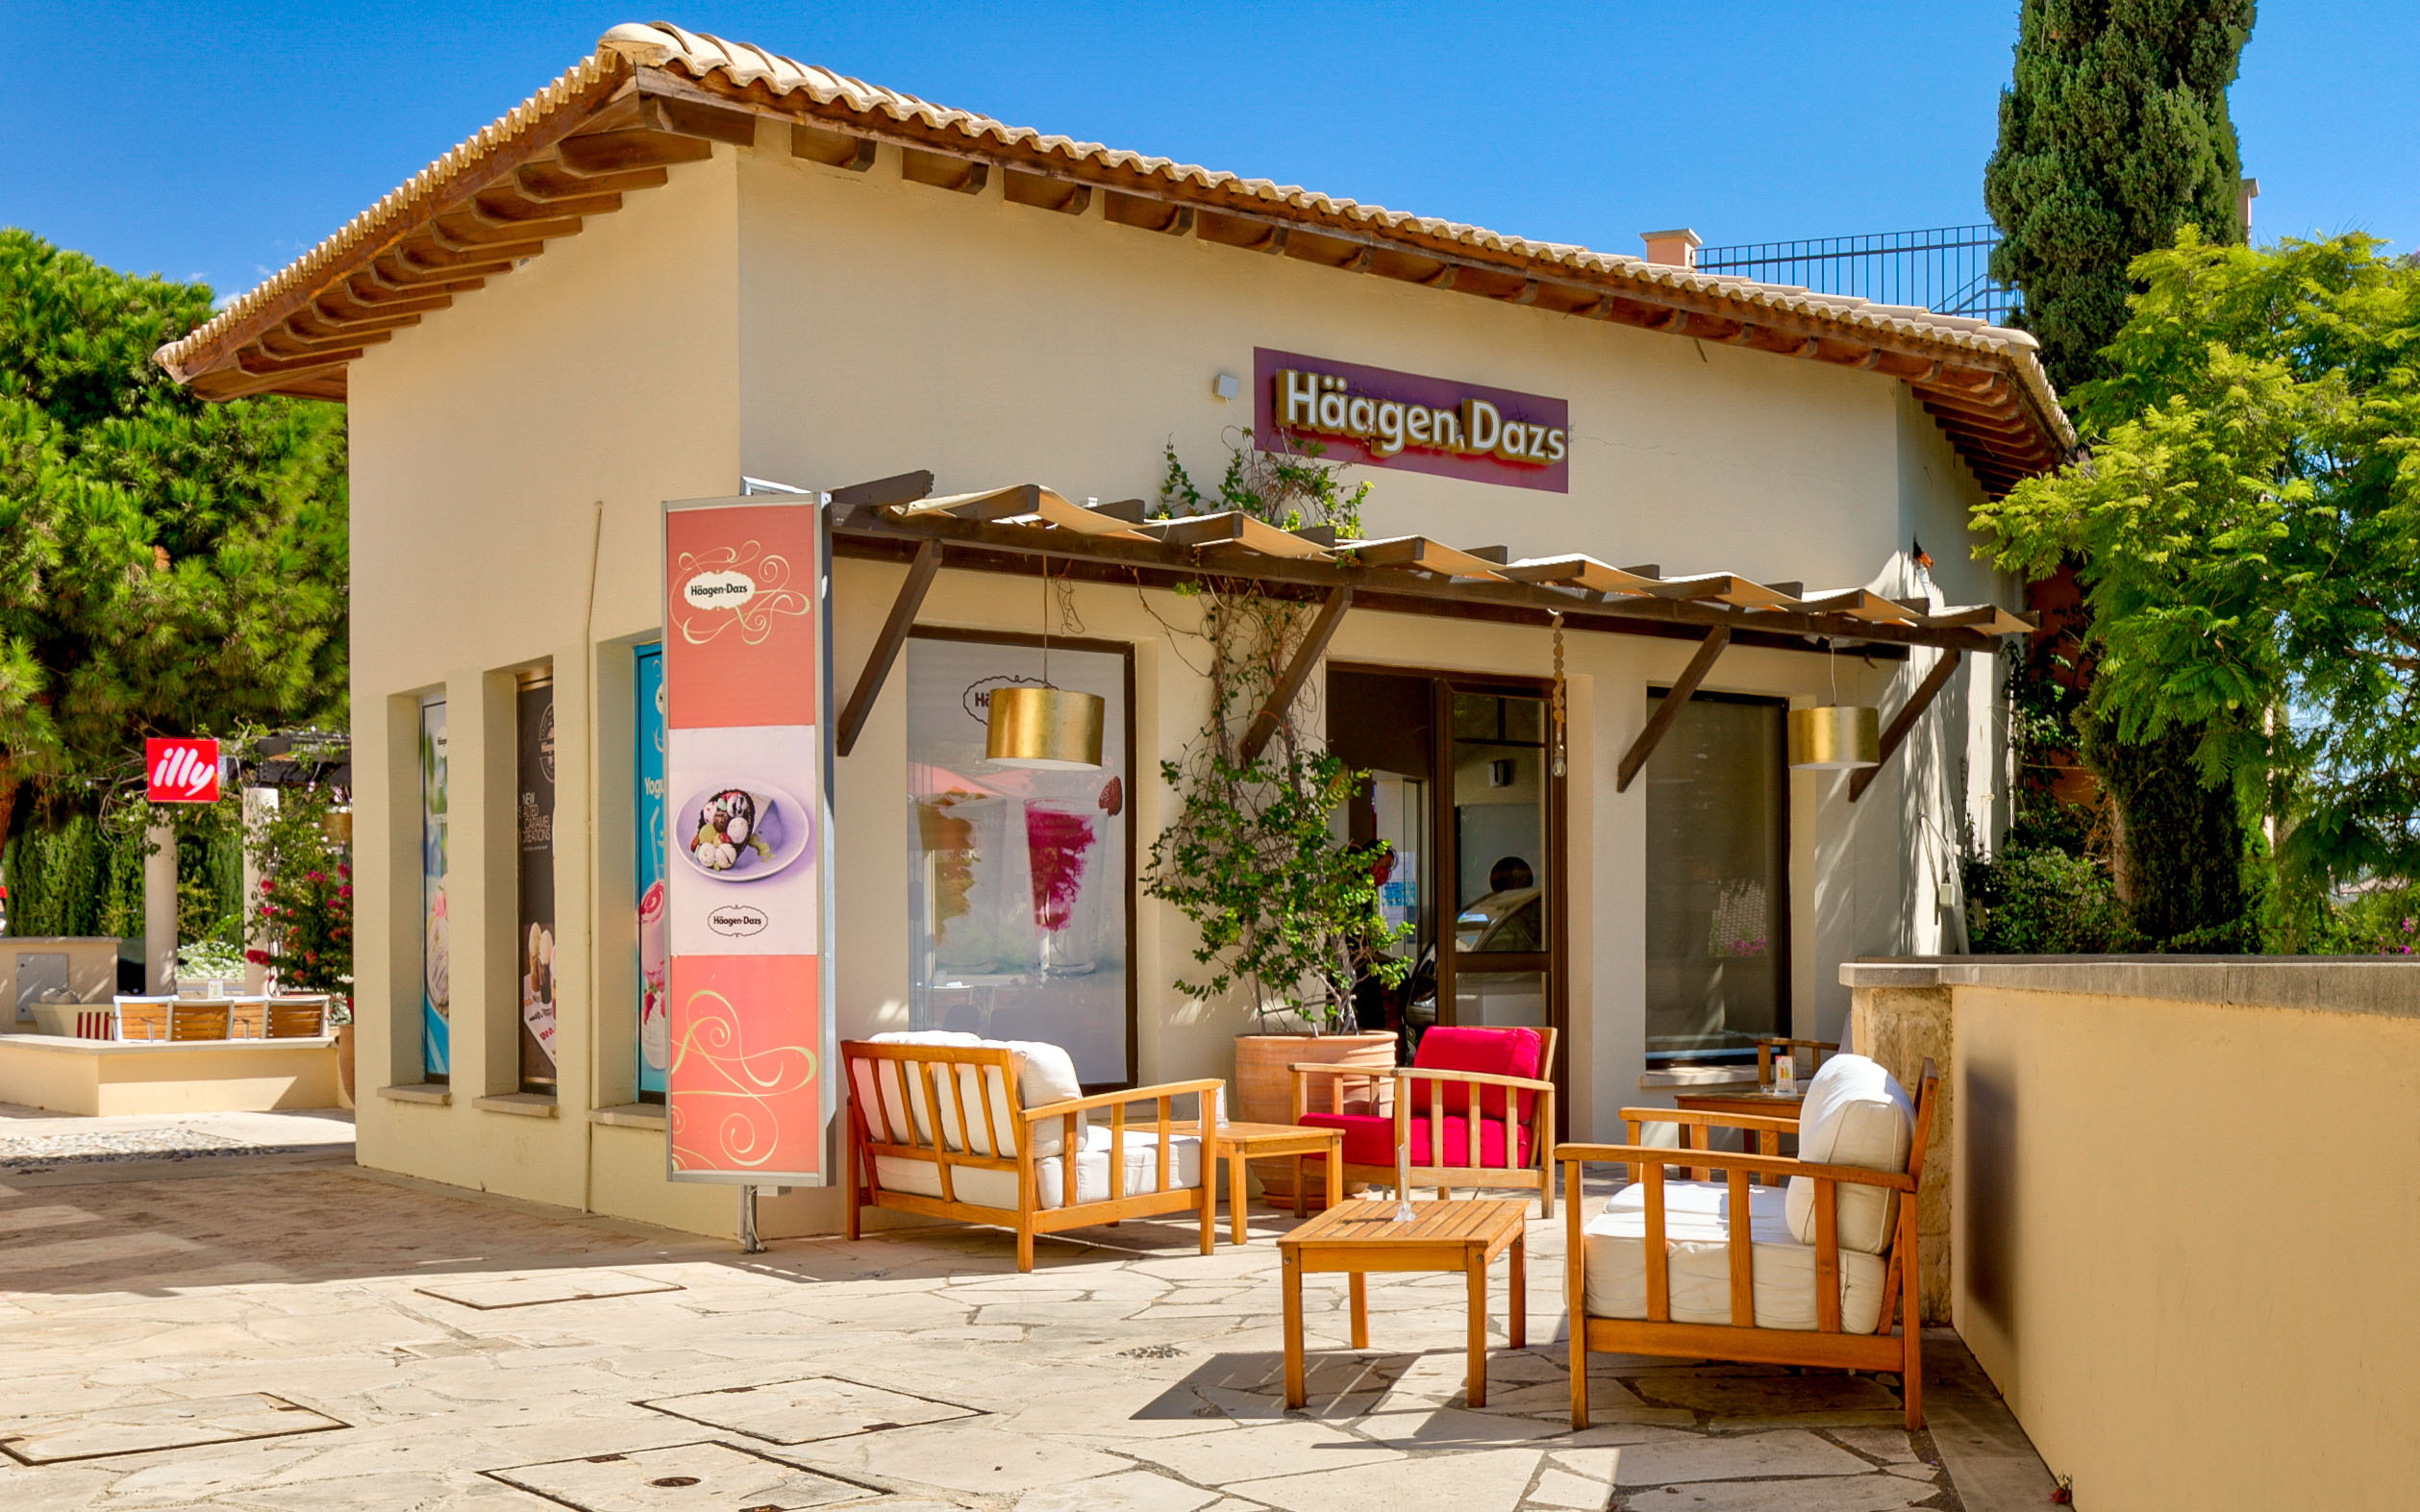 View of the Haagen Dazs cafe at Aphrodite Hills Resort, with comfortable seating outside. Cyprus.